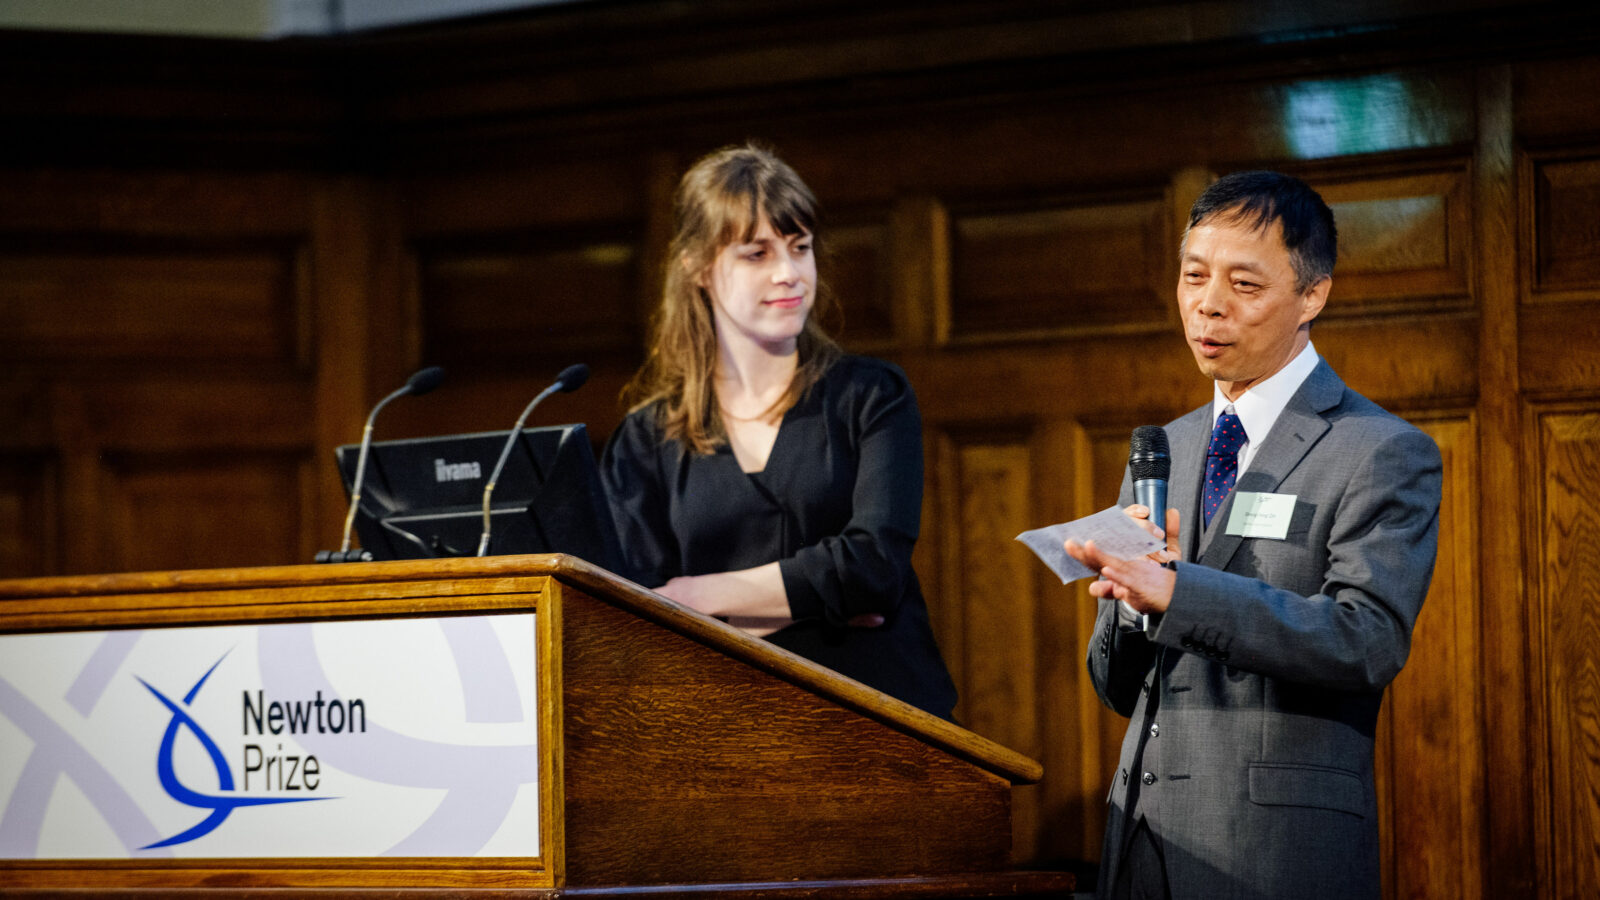 Image of Newton Prize 2019 China winner speaking on stage at London prize event